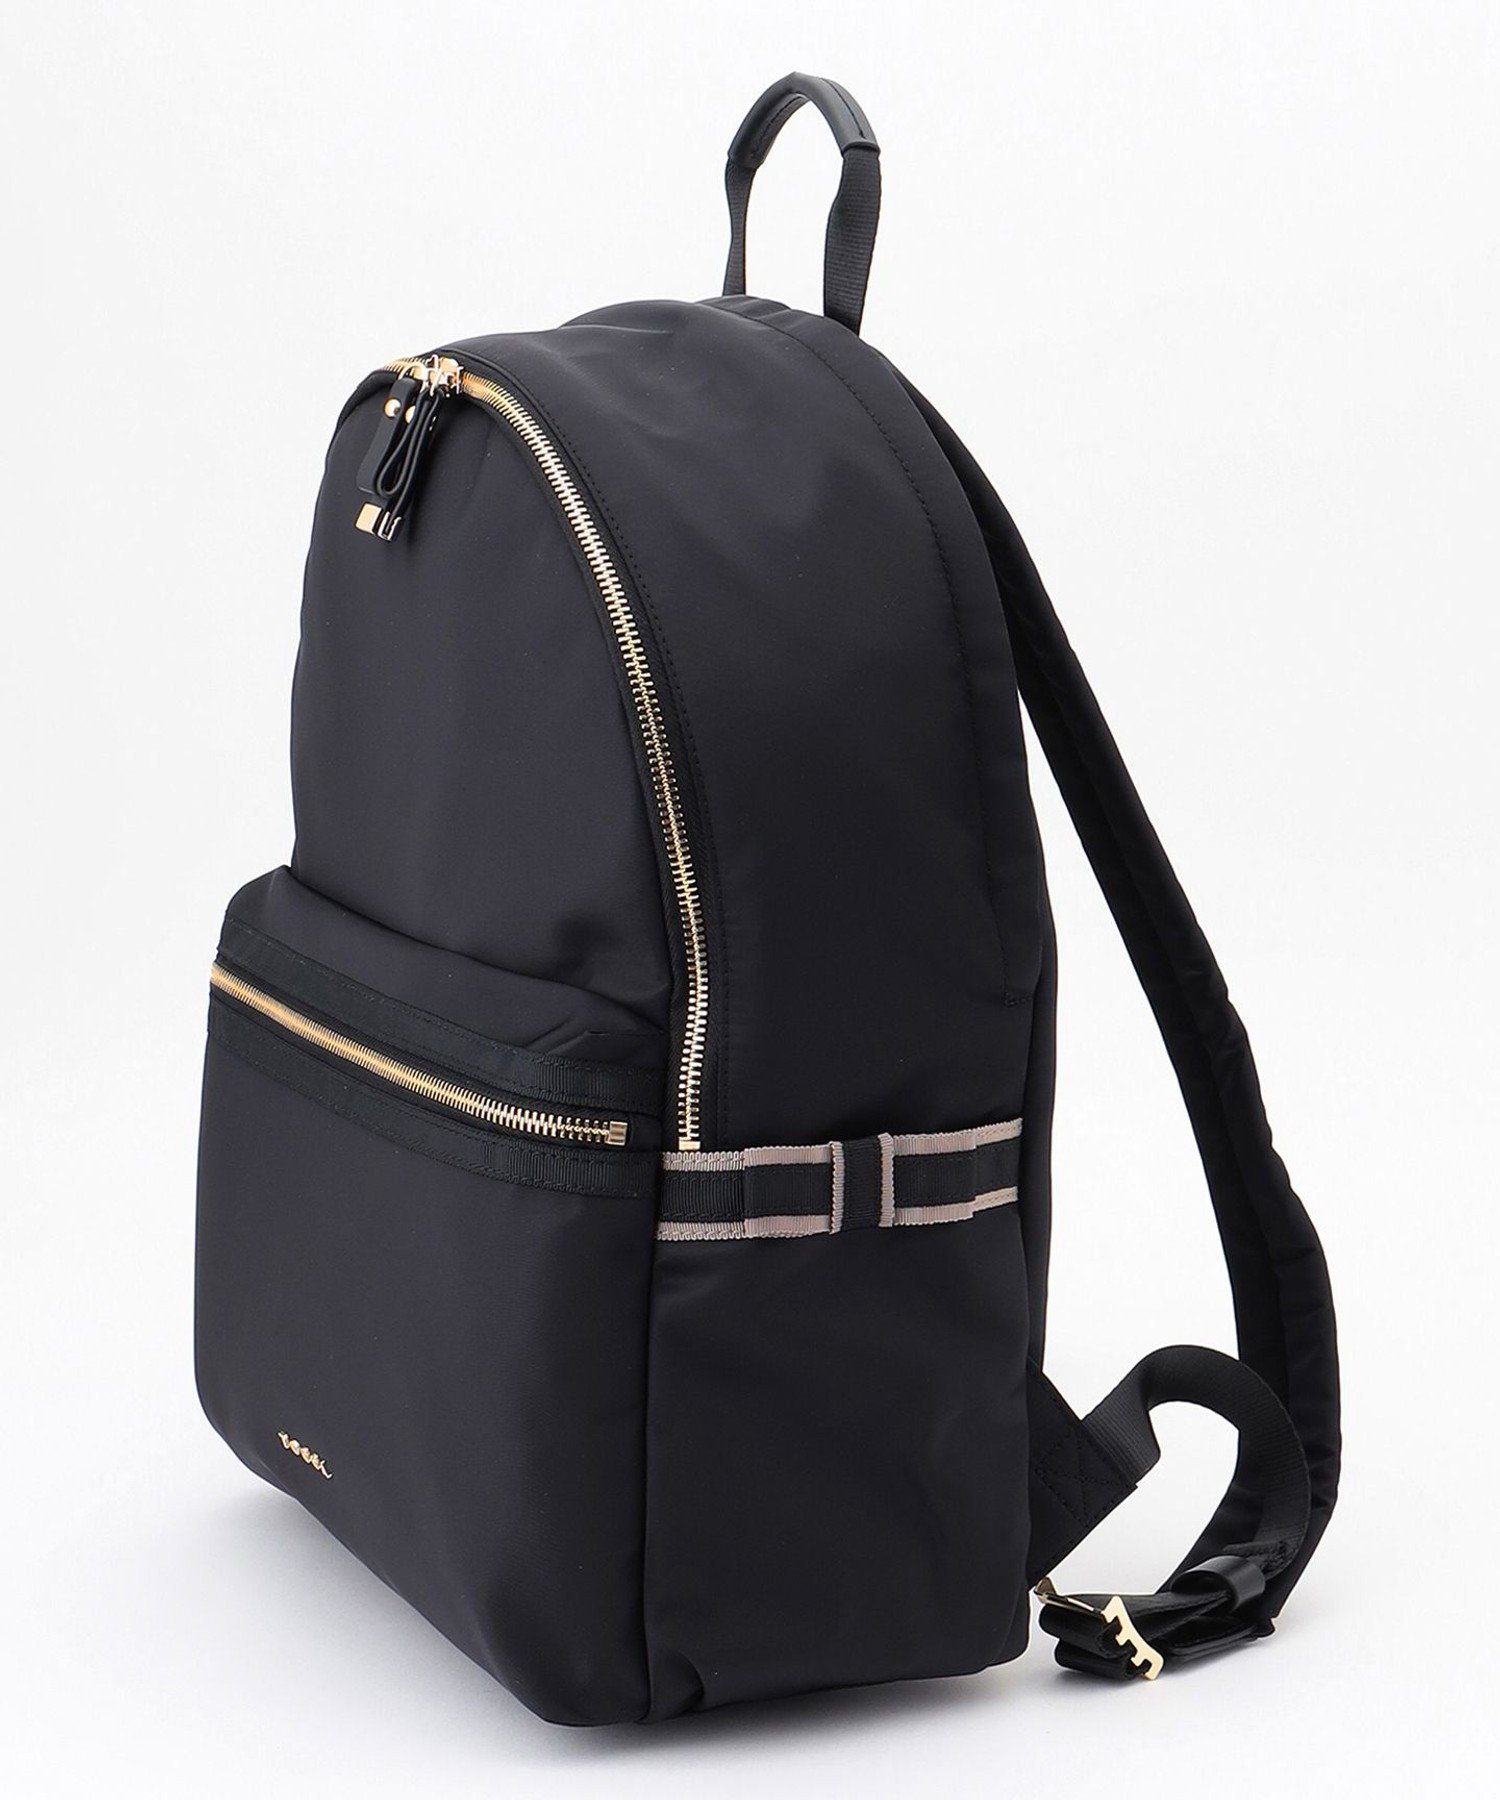 tocca SIDE RIBBON BACKPACK リュックサック バッグ リュック/バック